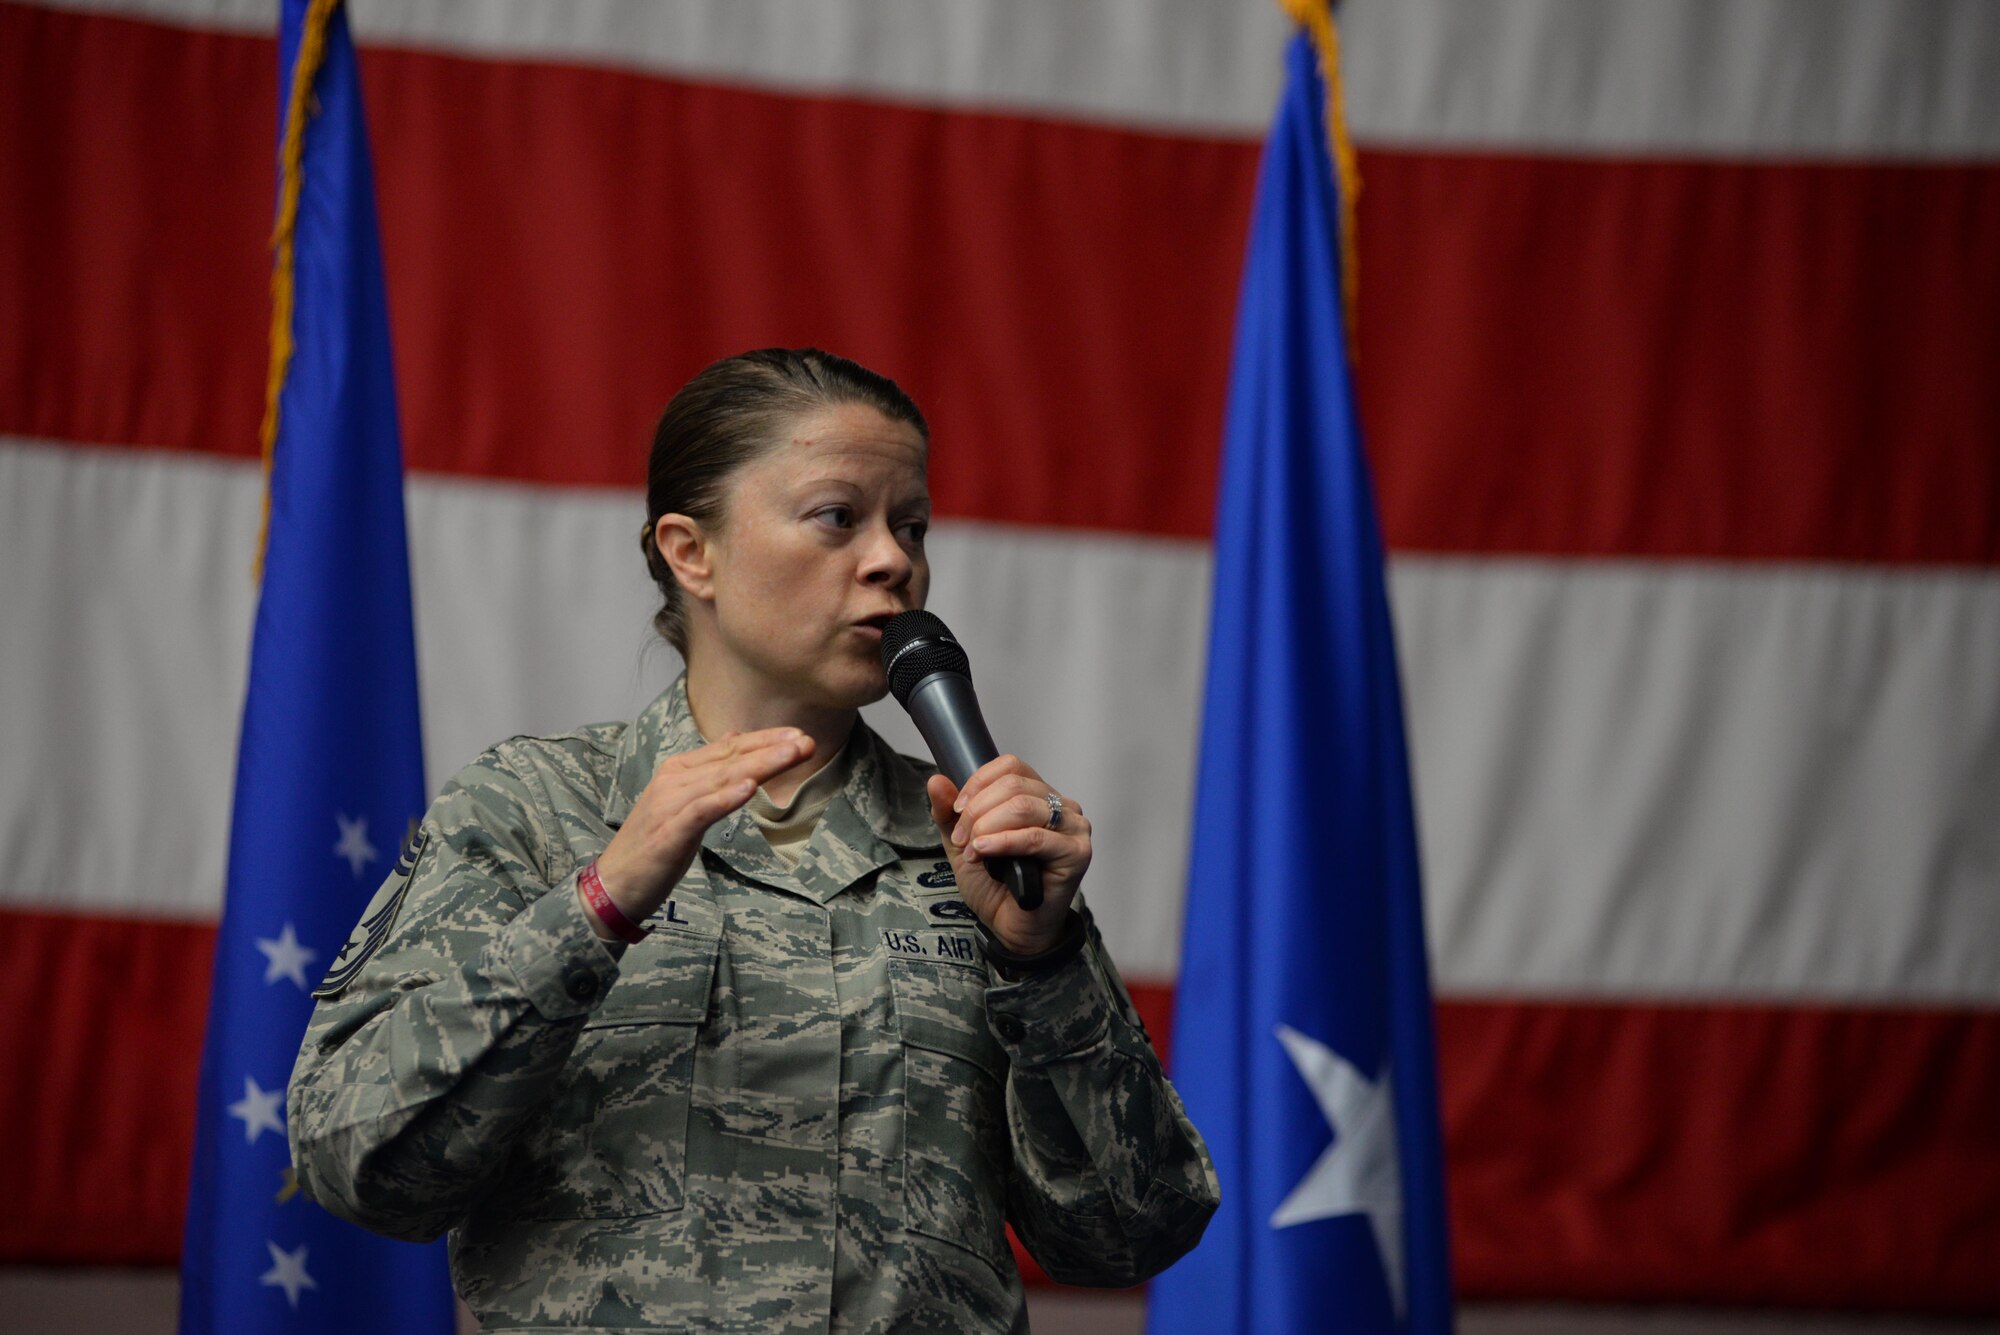 Chief Master Sgt. Brandy Petzel, Headquarters Air Force chief of enlisted force policy, presents the new enlisted evaluation system July 13, 2015, at Andersen Air Force Base, Guam. Airmen attended an all-call with Air Force Personnel Center officials to learn more about fundamental changes to the enlisted evaluation system and Weighted Airmen Promotion System. (U.S. Air Force photo by Senior Airman Alexander W. Riedel/Released)